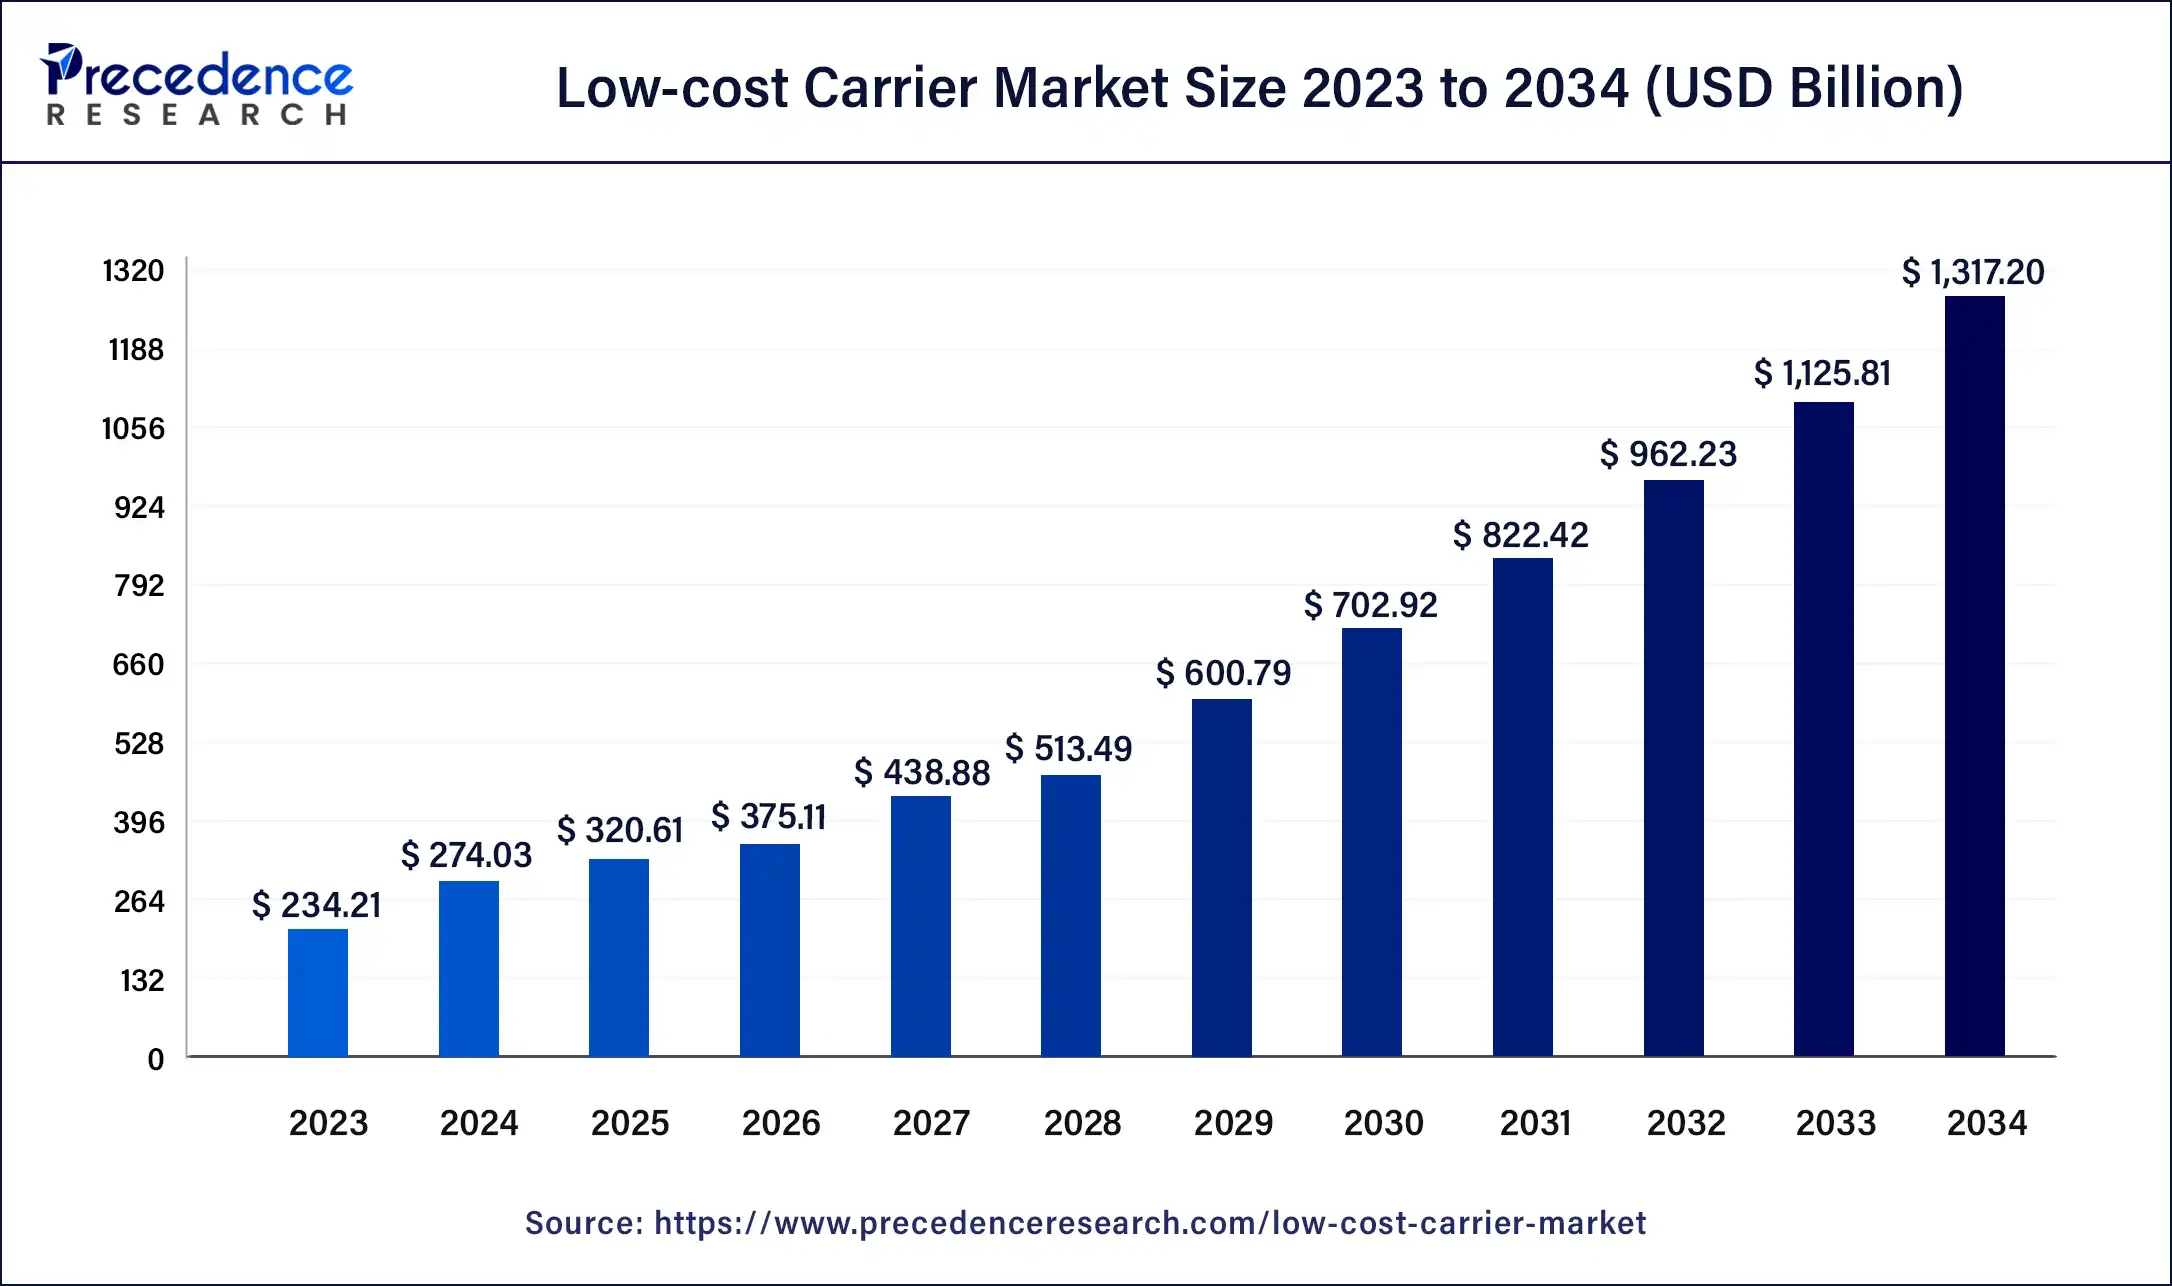 Low-cost Carrier Market Size 2024 to 2034